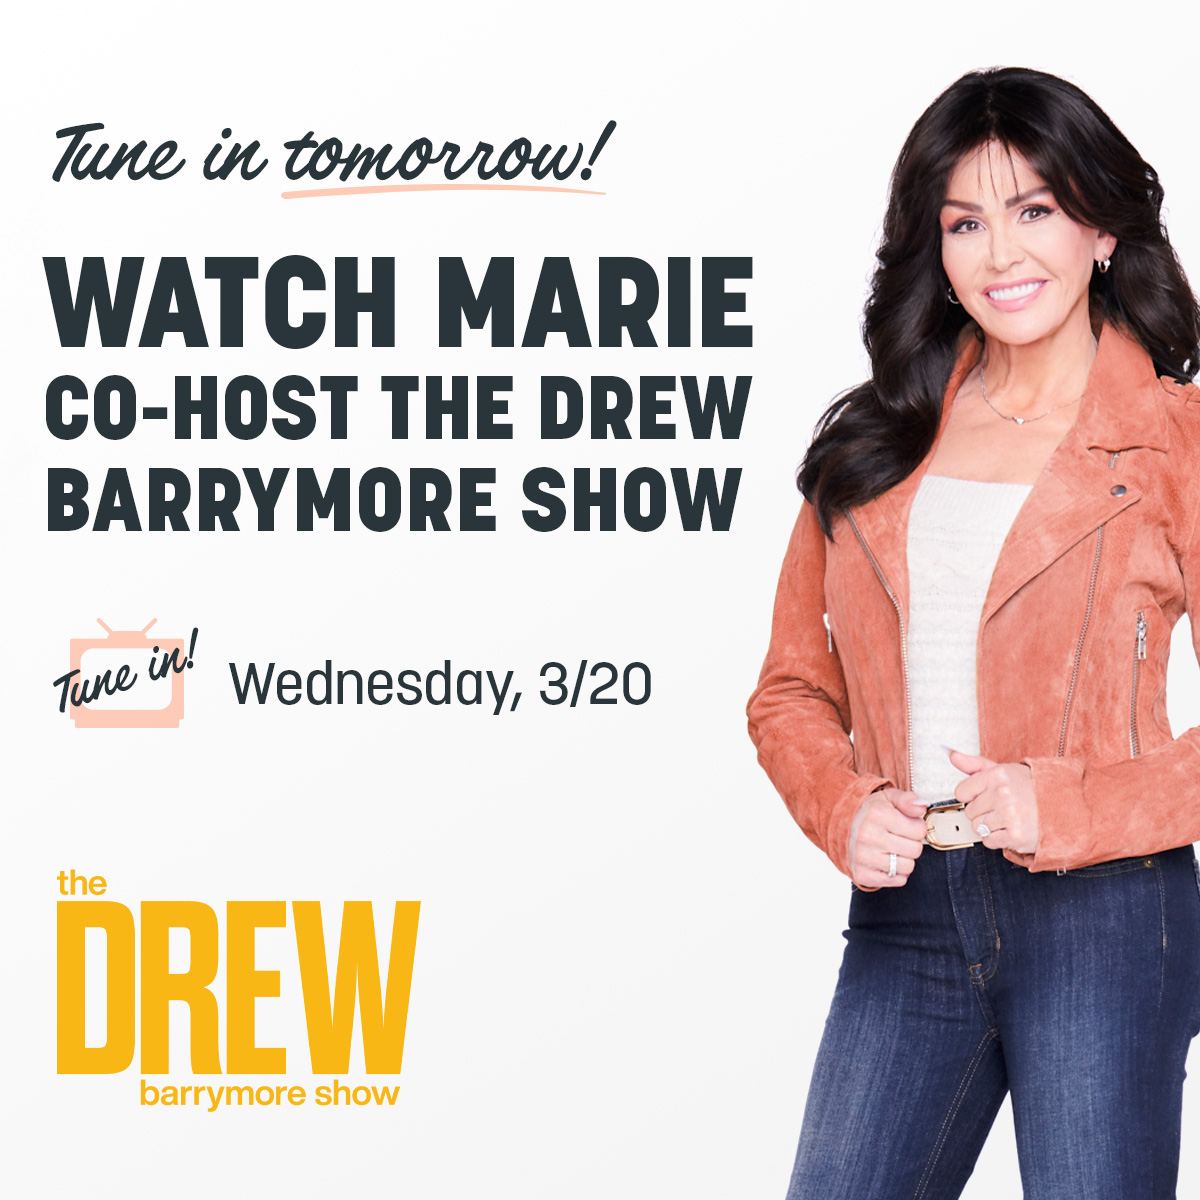 📺 You don’t want to miss Marie Osmond on The Drew Barrymore Show tomorrow! 🌼 Learn what Marie and Drew have in common and get some healthy tips for spring! 🌷 Catch her co-hosting Wednesday, March 20th!